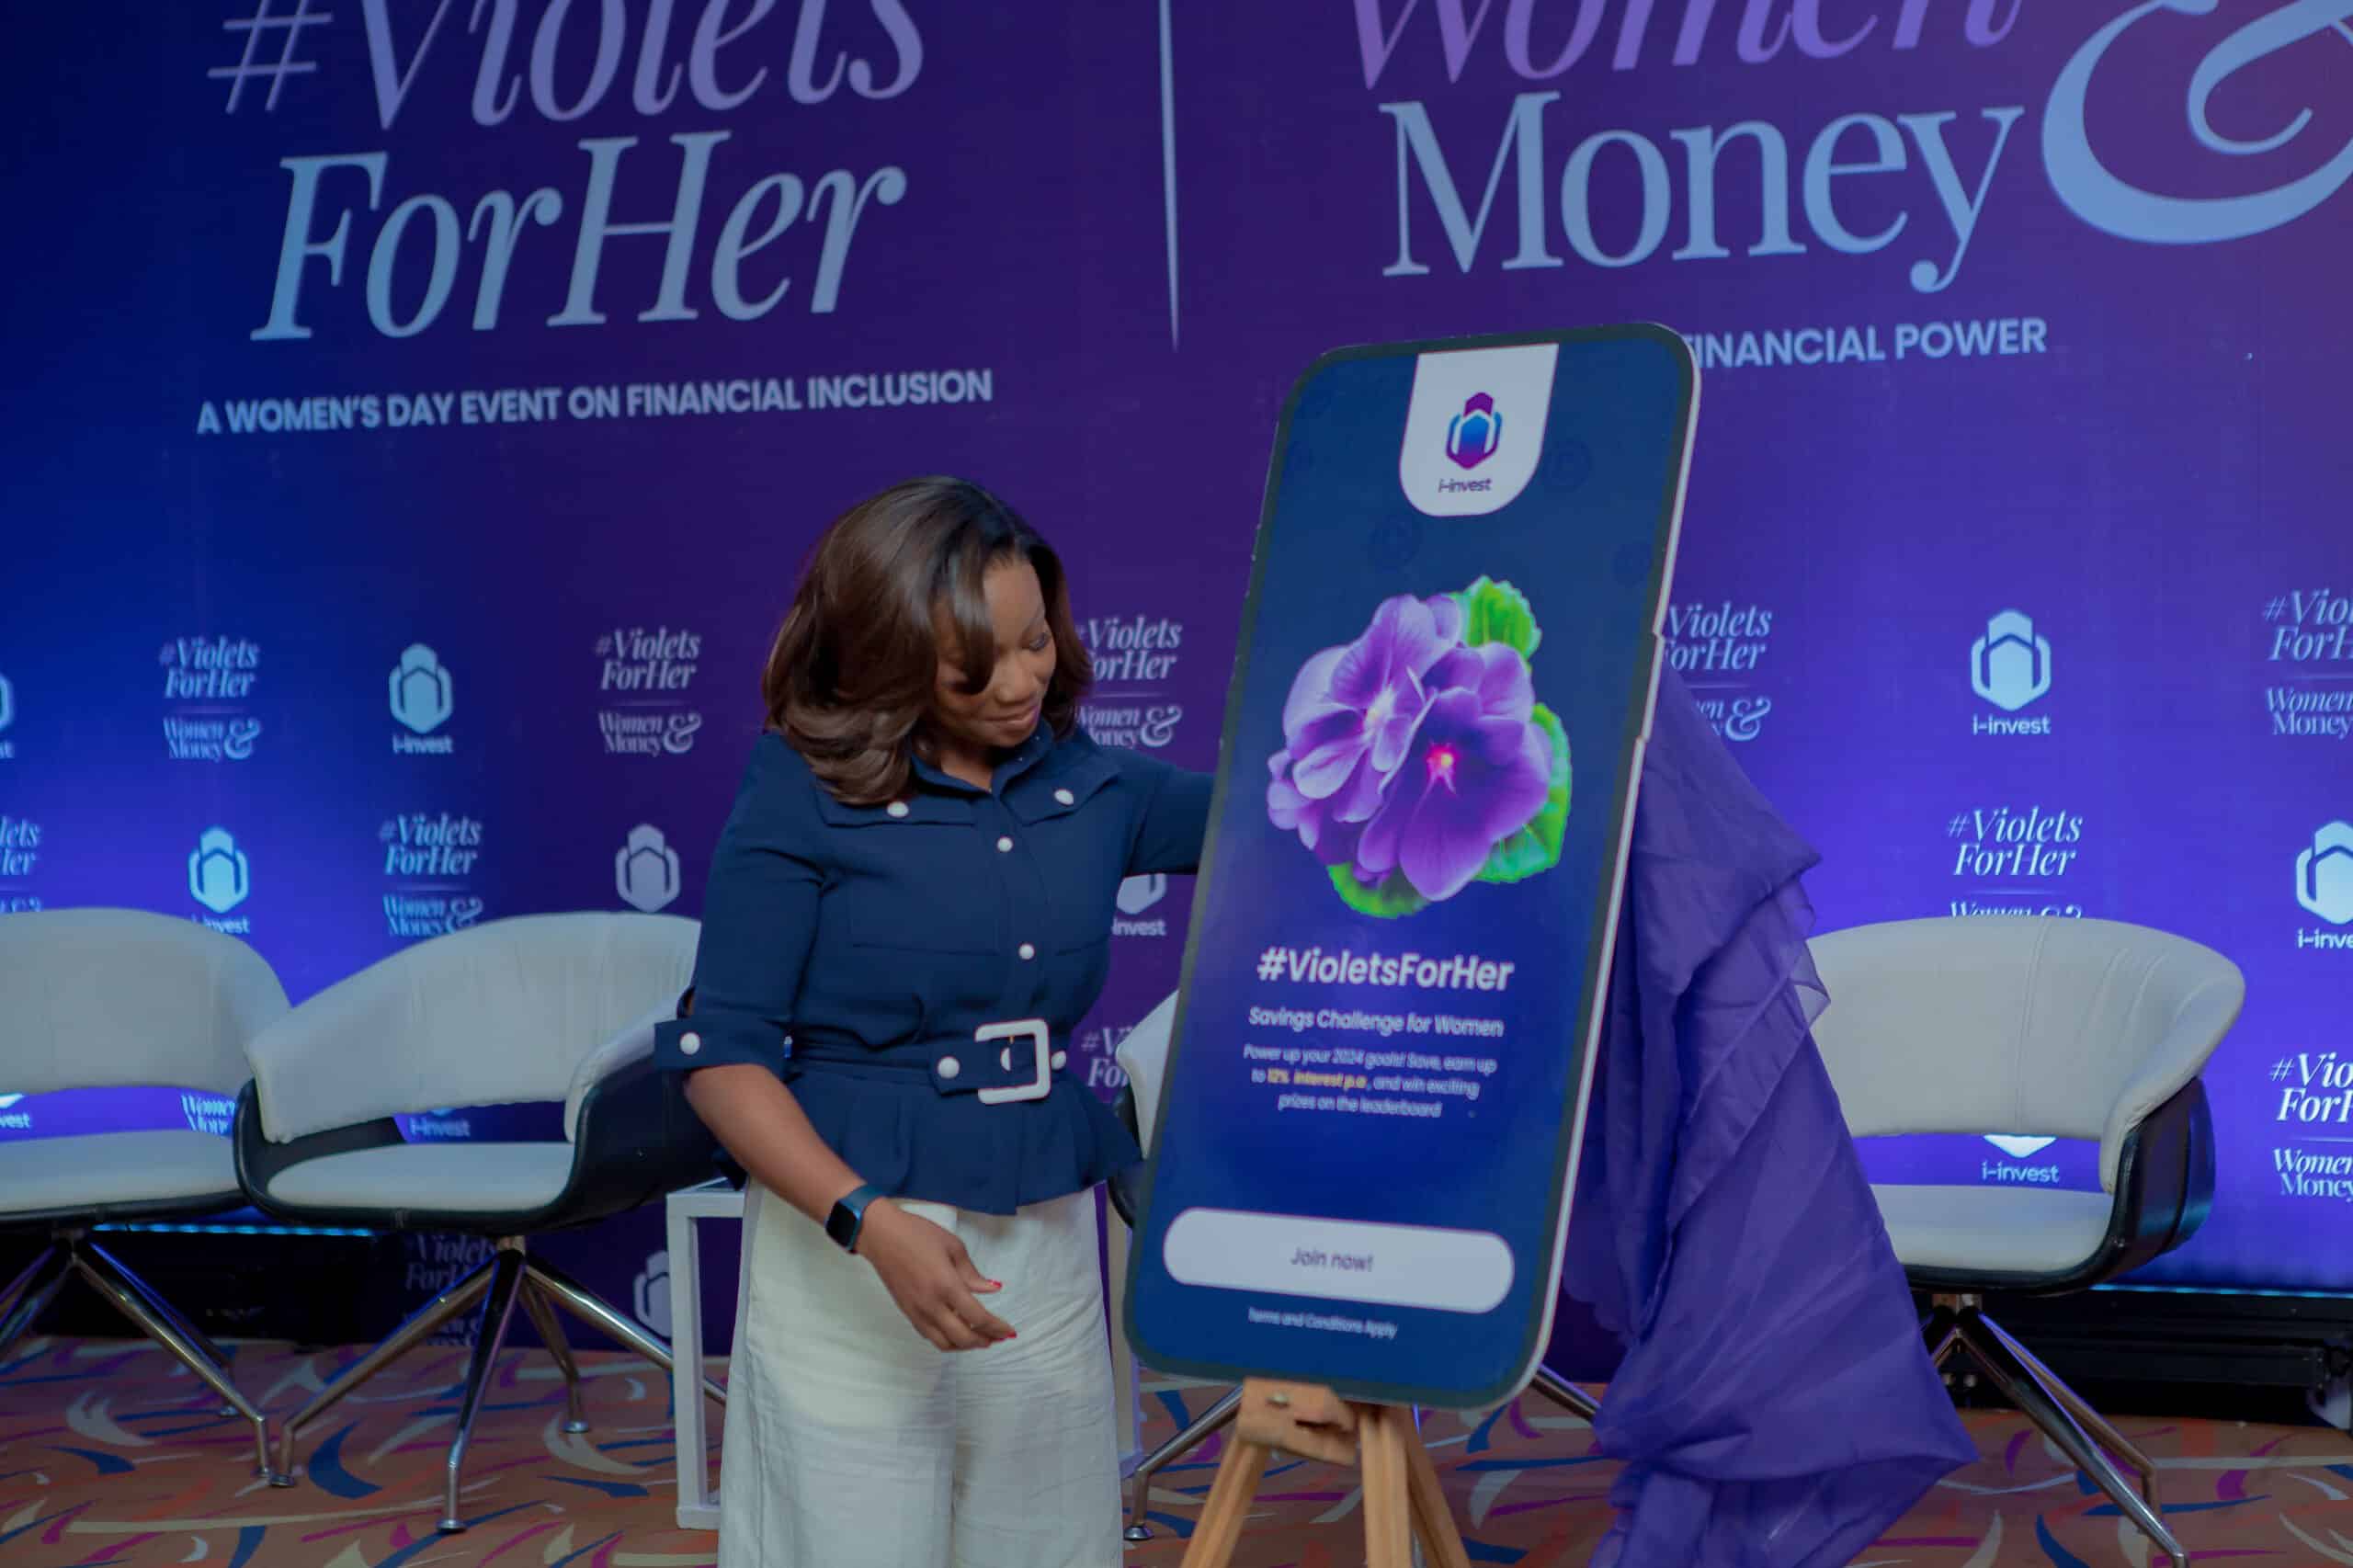 Parthian Partners’ i-invest App Launches #VioletsForHer Savings Plan to Empower Women Financially